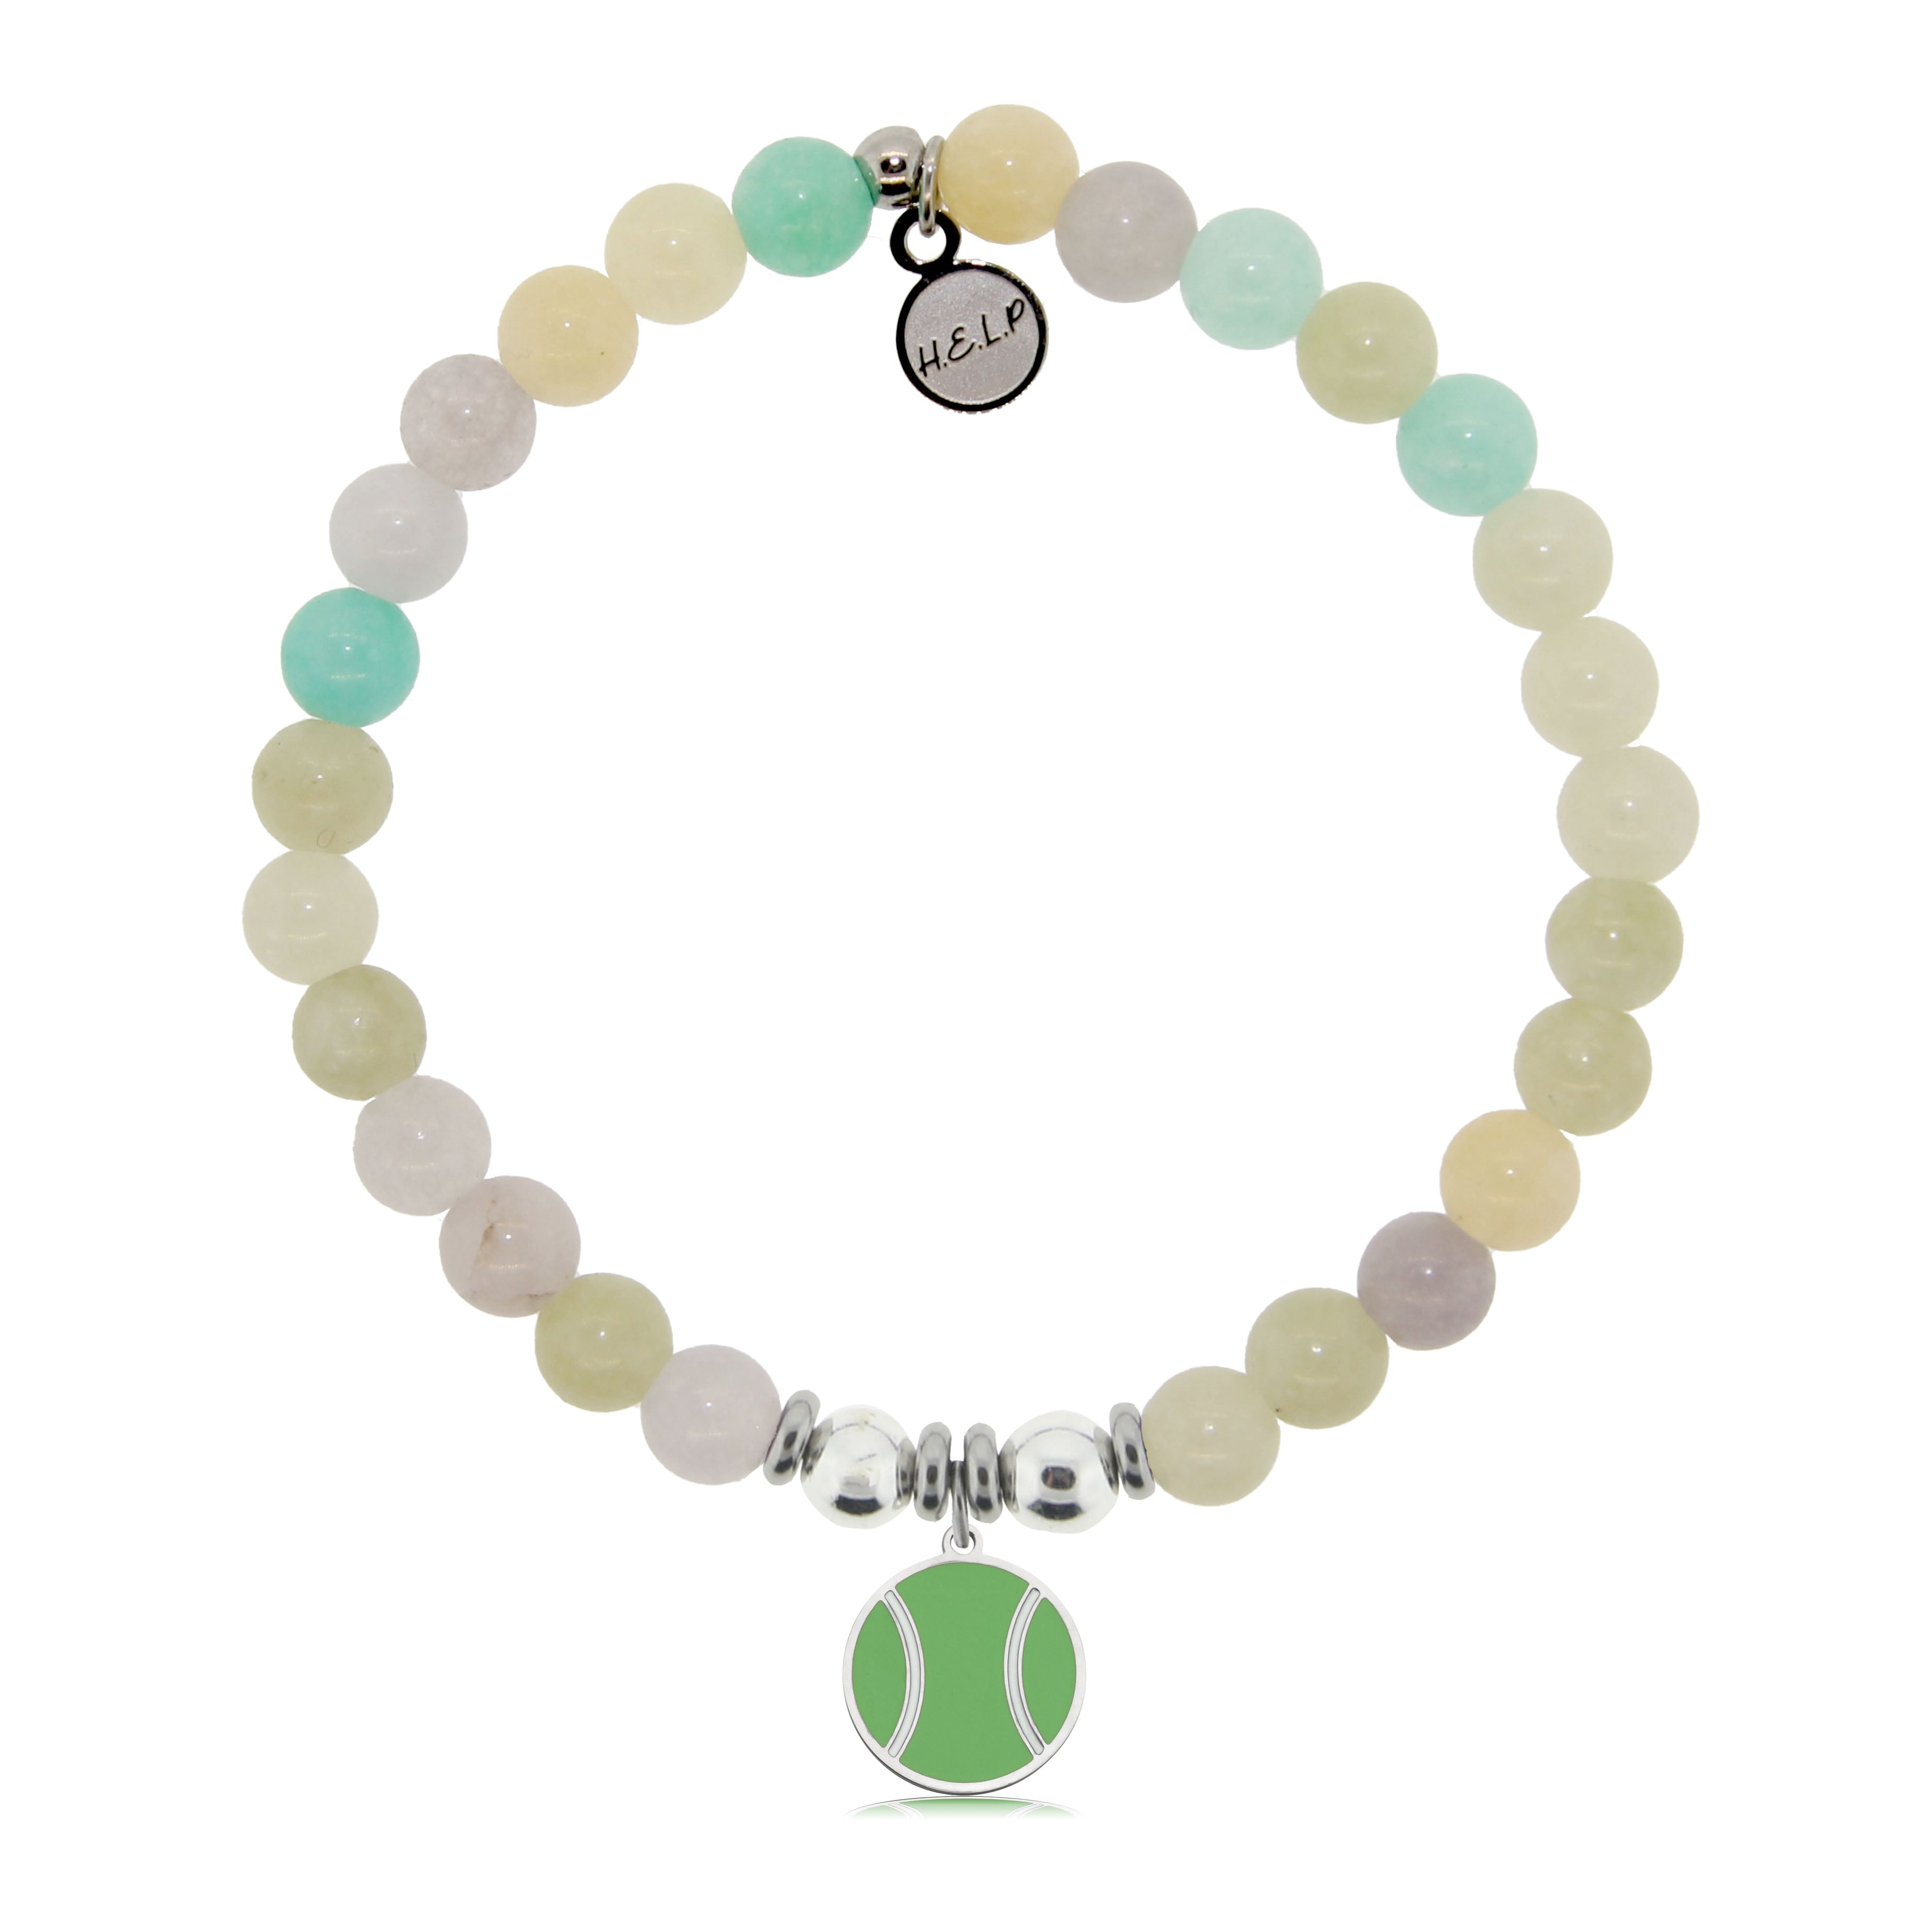 HELP by TJ Tennis Ball Charm with Green Yellow Jade Charity Bracelet